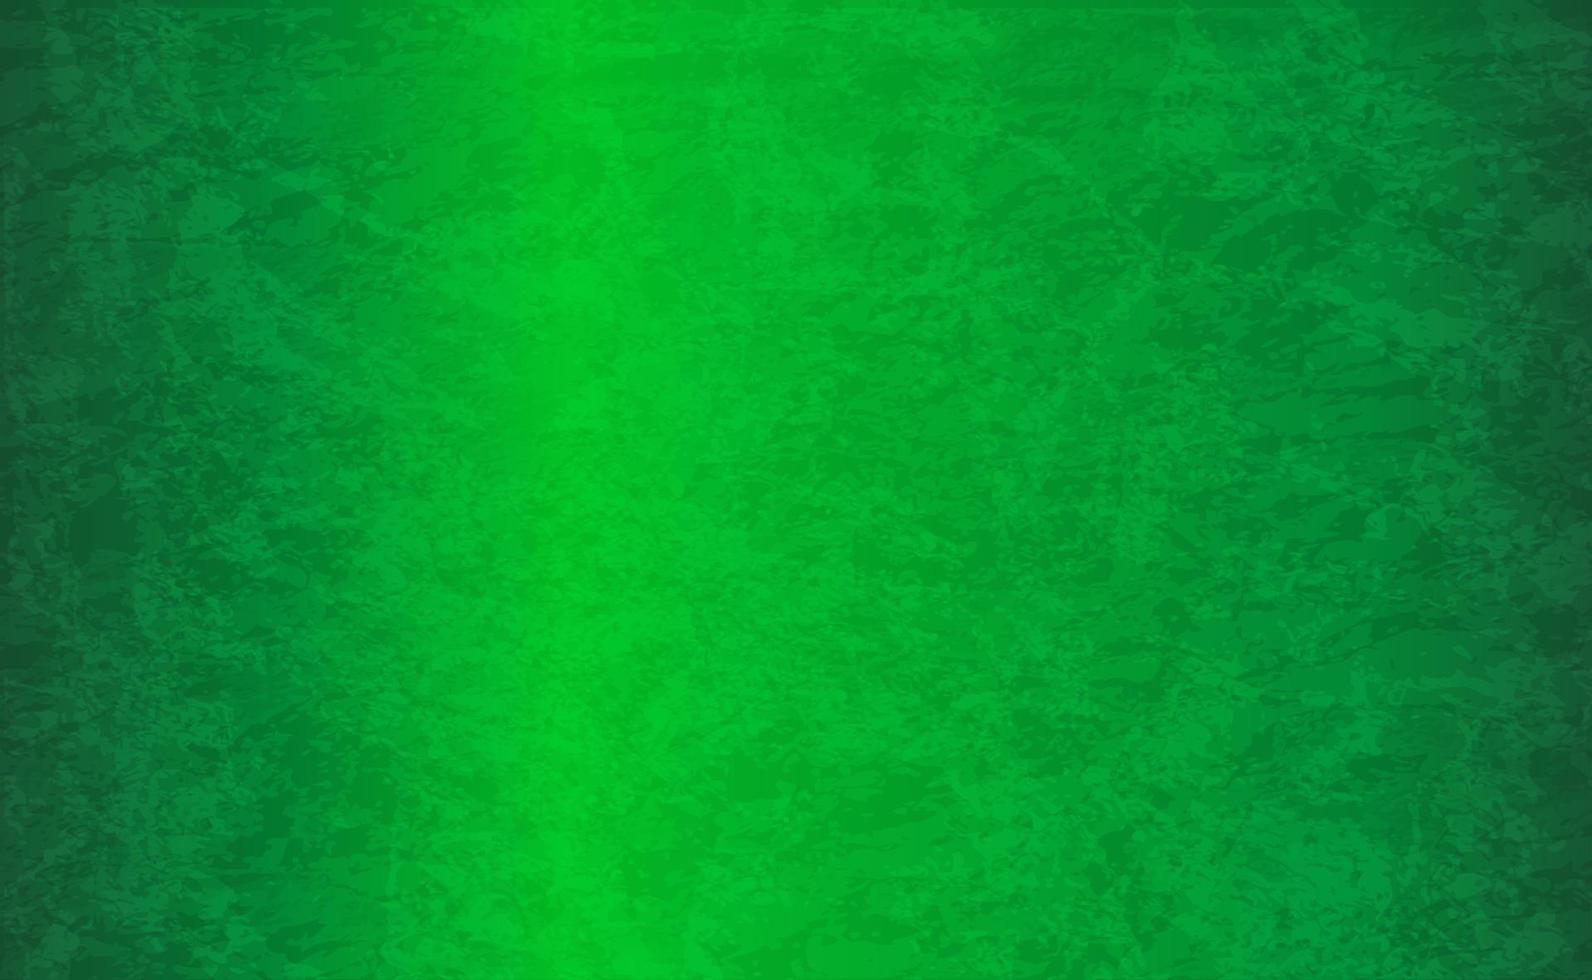 Green background free download vector